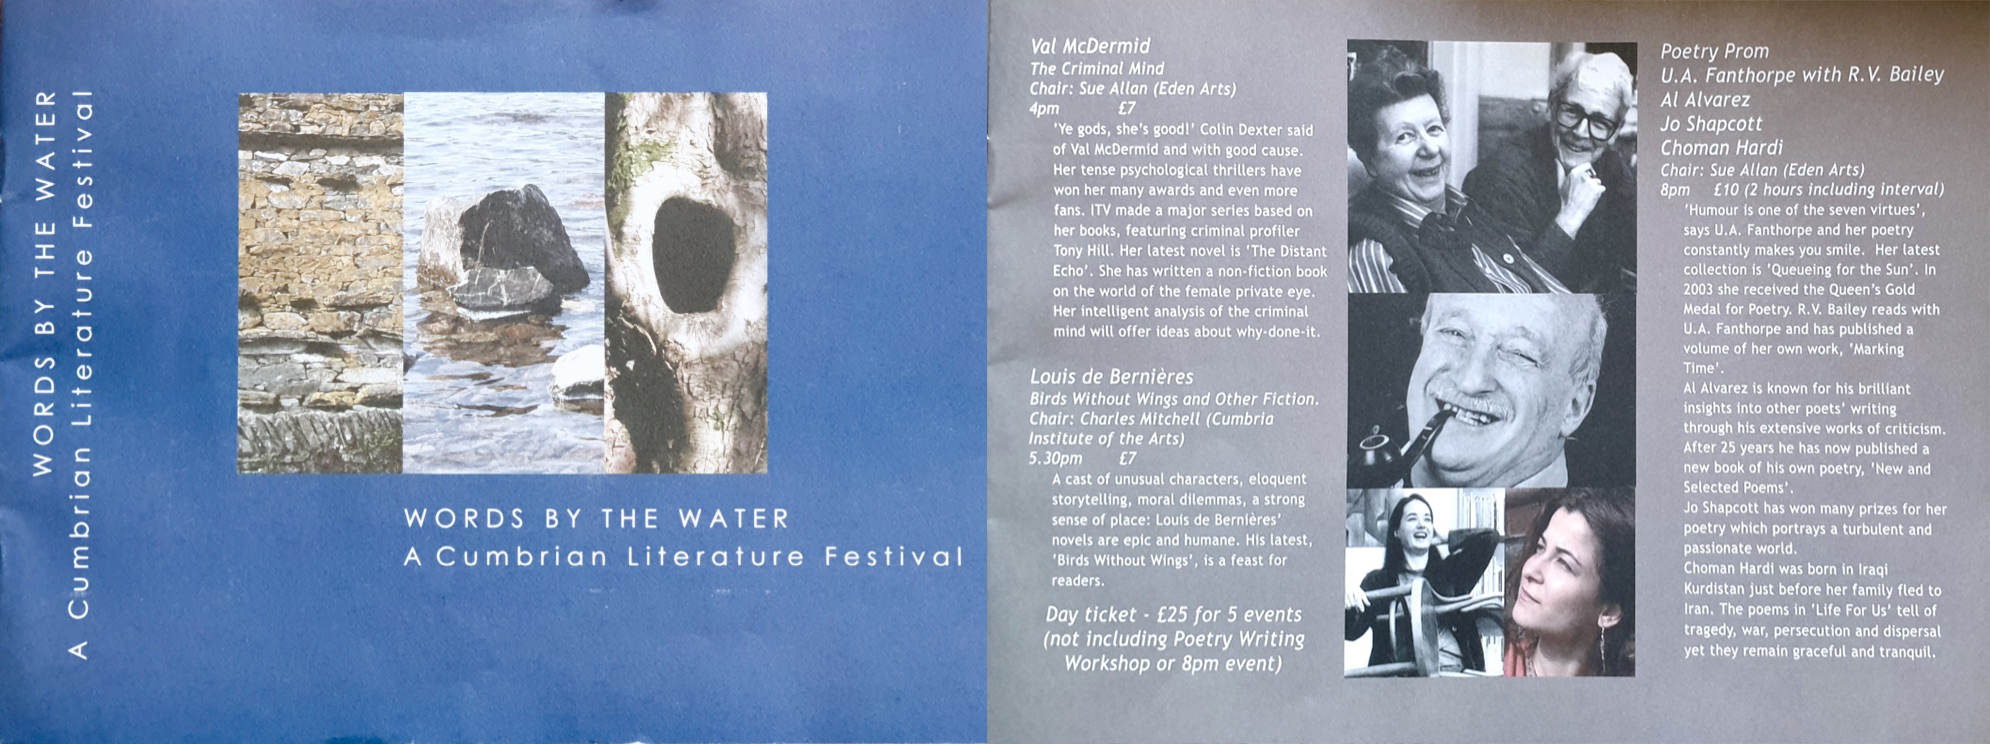 Words by The Water Festival